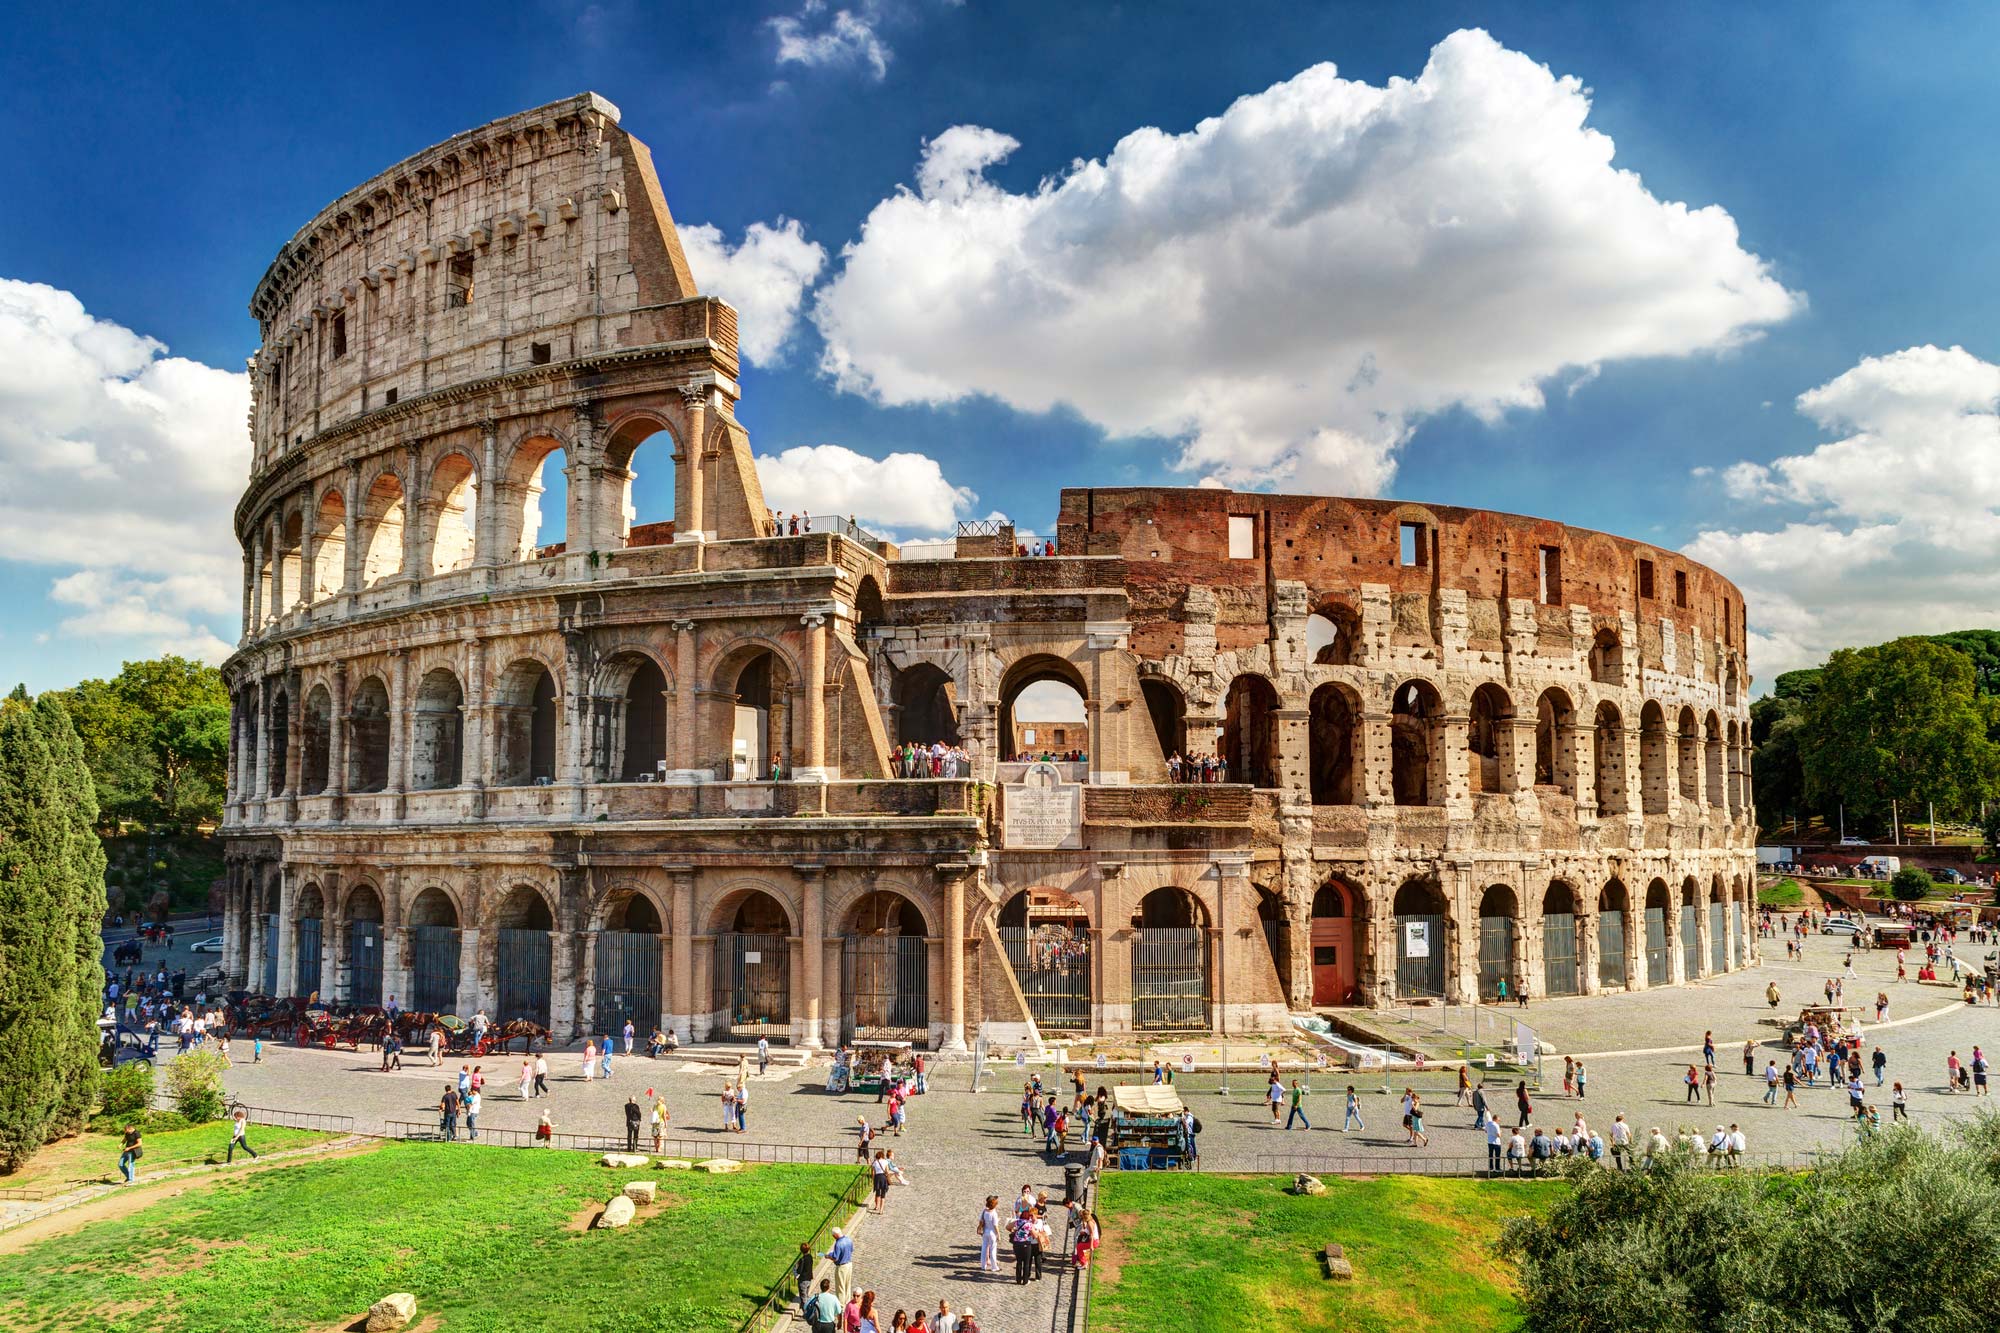 What 4 things was the Colosseum used for?